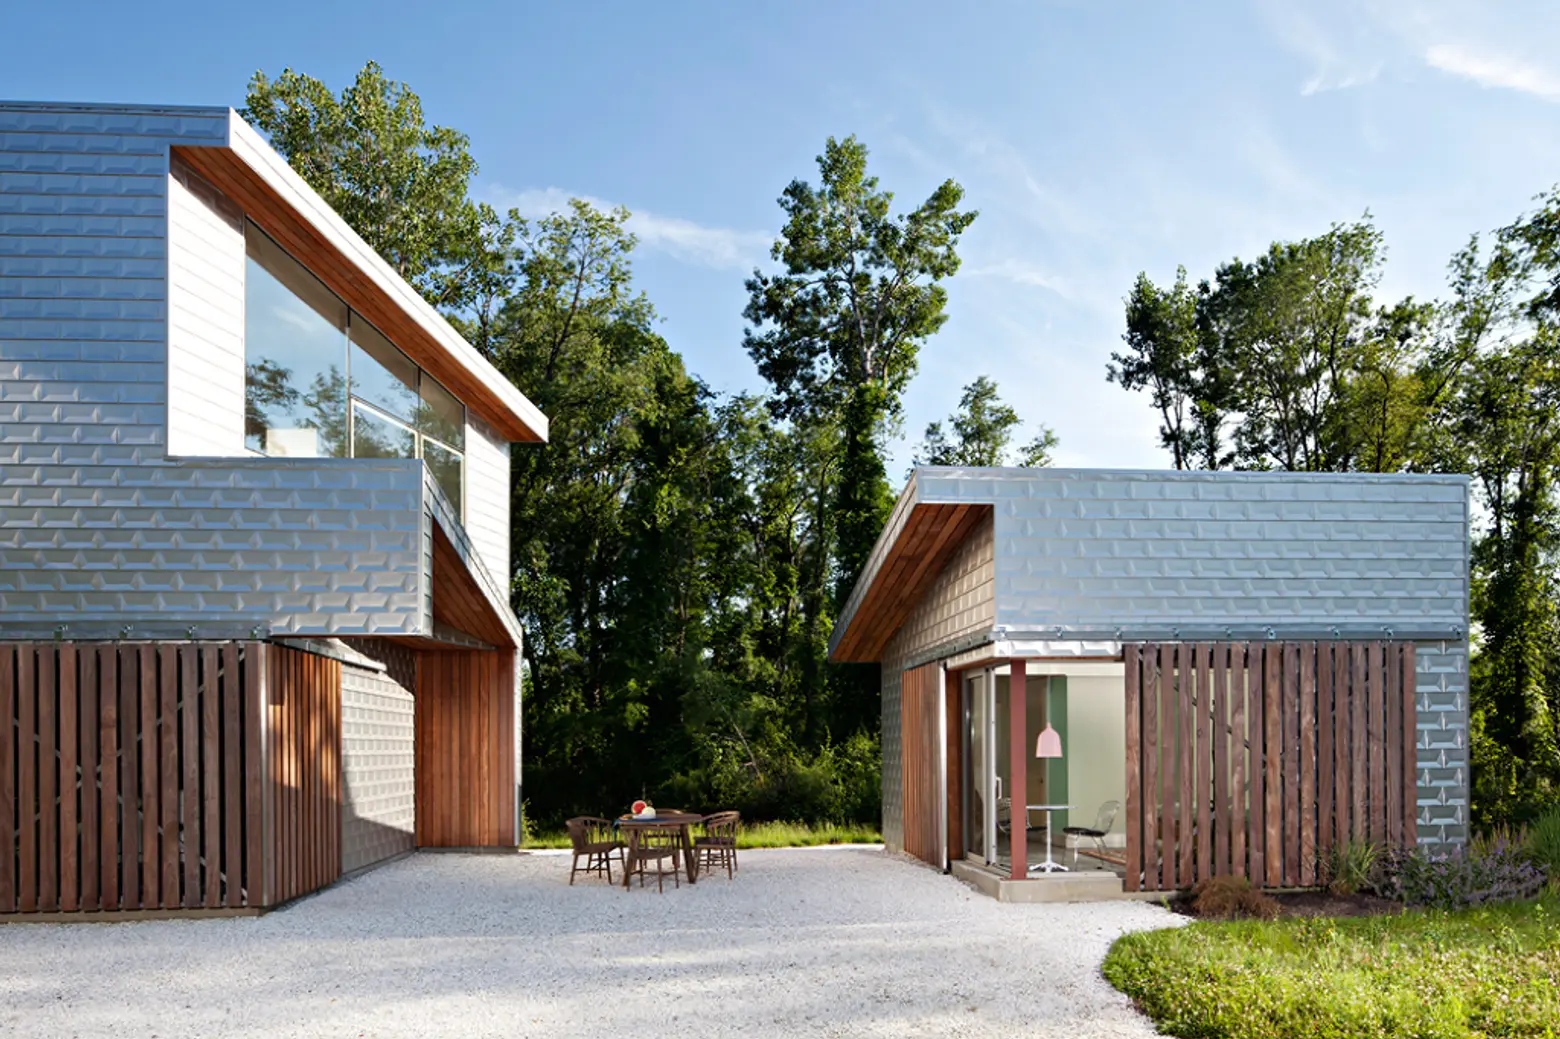 Aluminum-Clad houses, contemporary country homes, Grzywinski + Pons, Dutchess House No. 1, Millerton New York homes, sustainable architecture